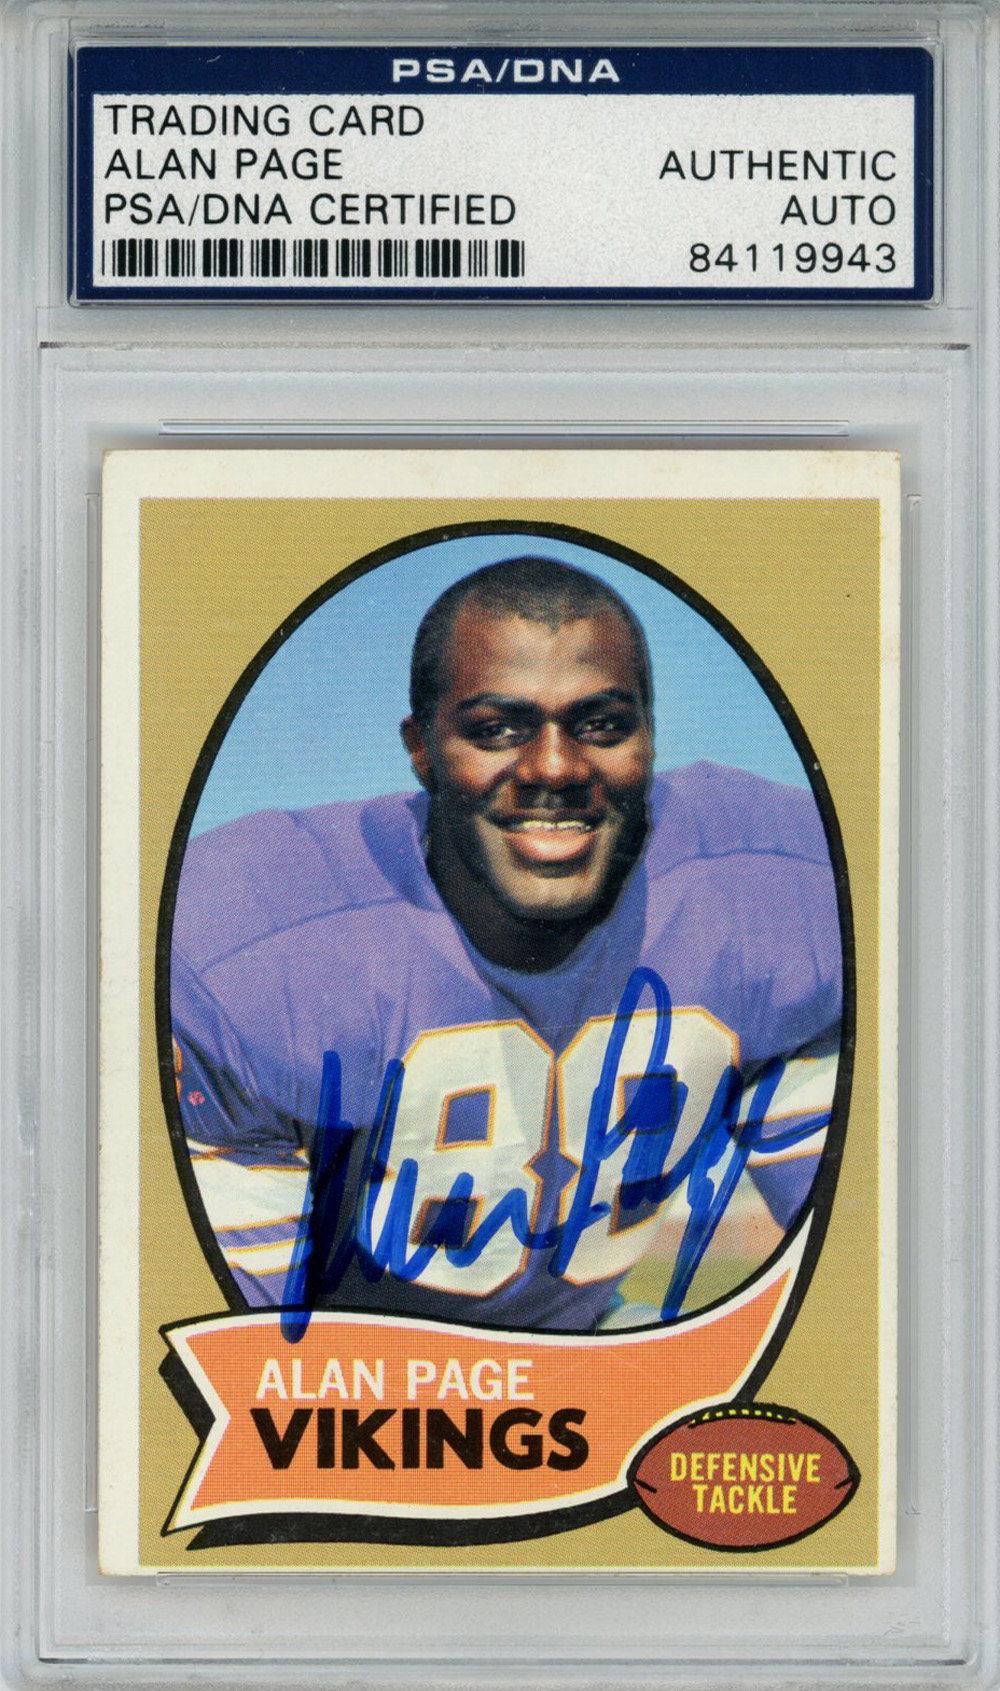 Alan Page Autographed 1970 Topps #59 Trading Card PSA Slab